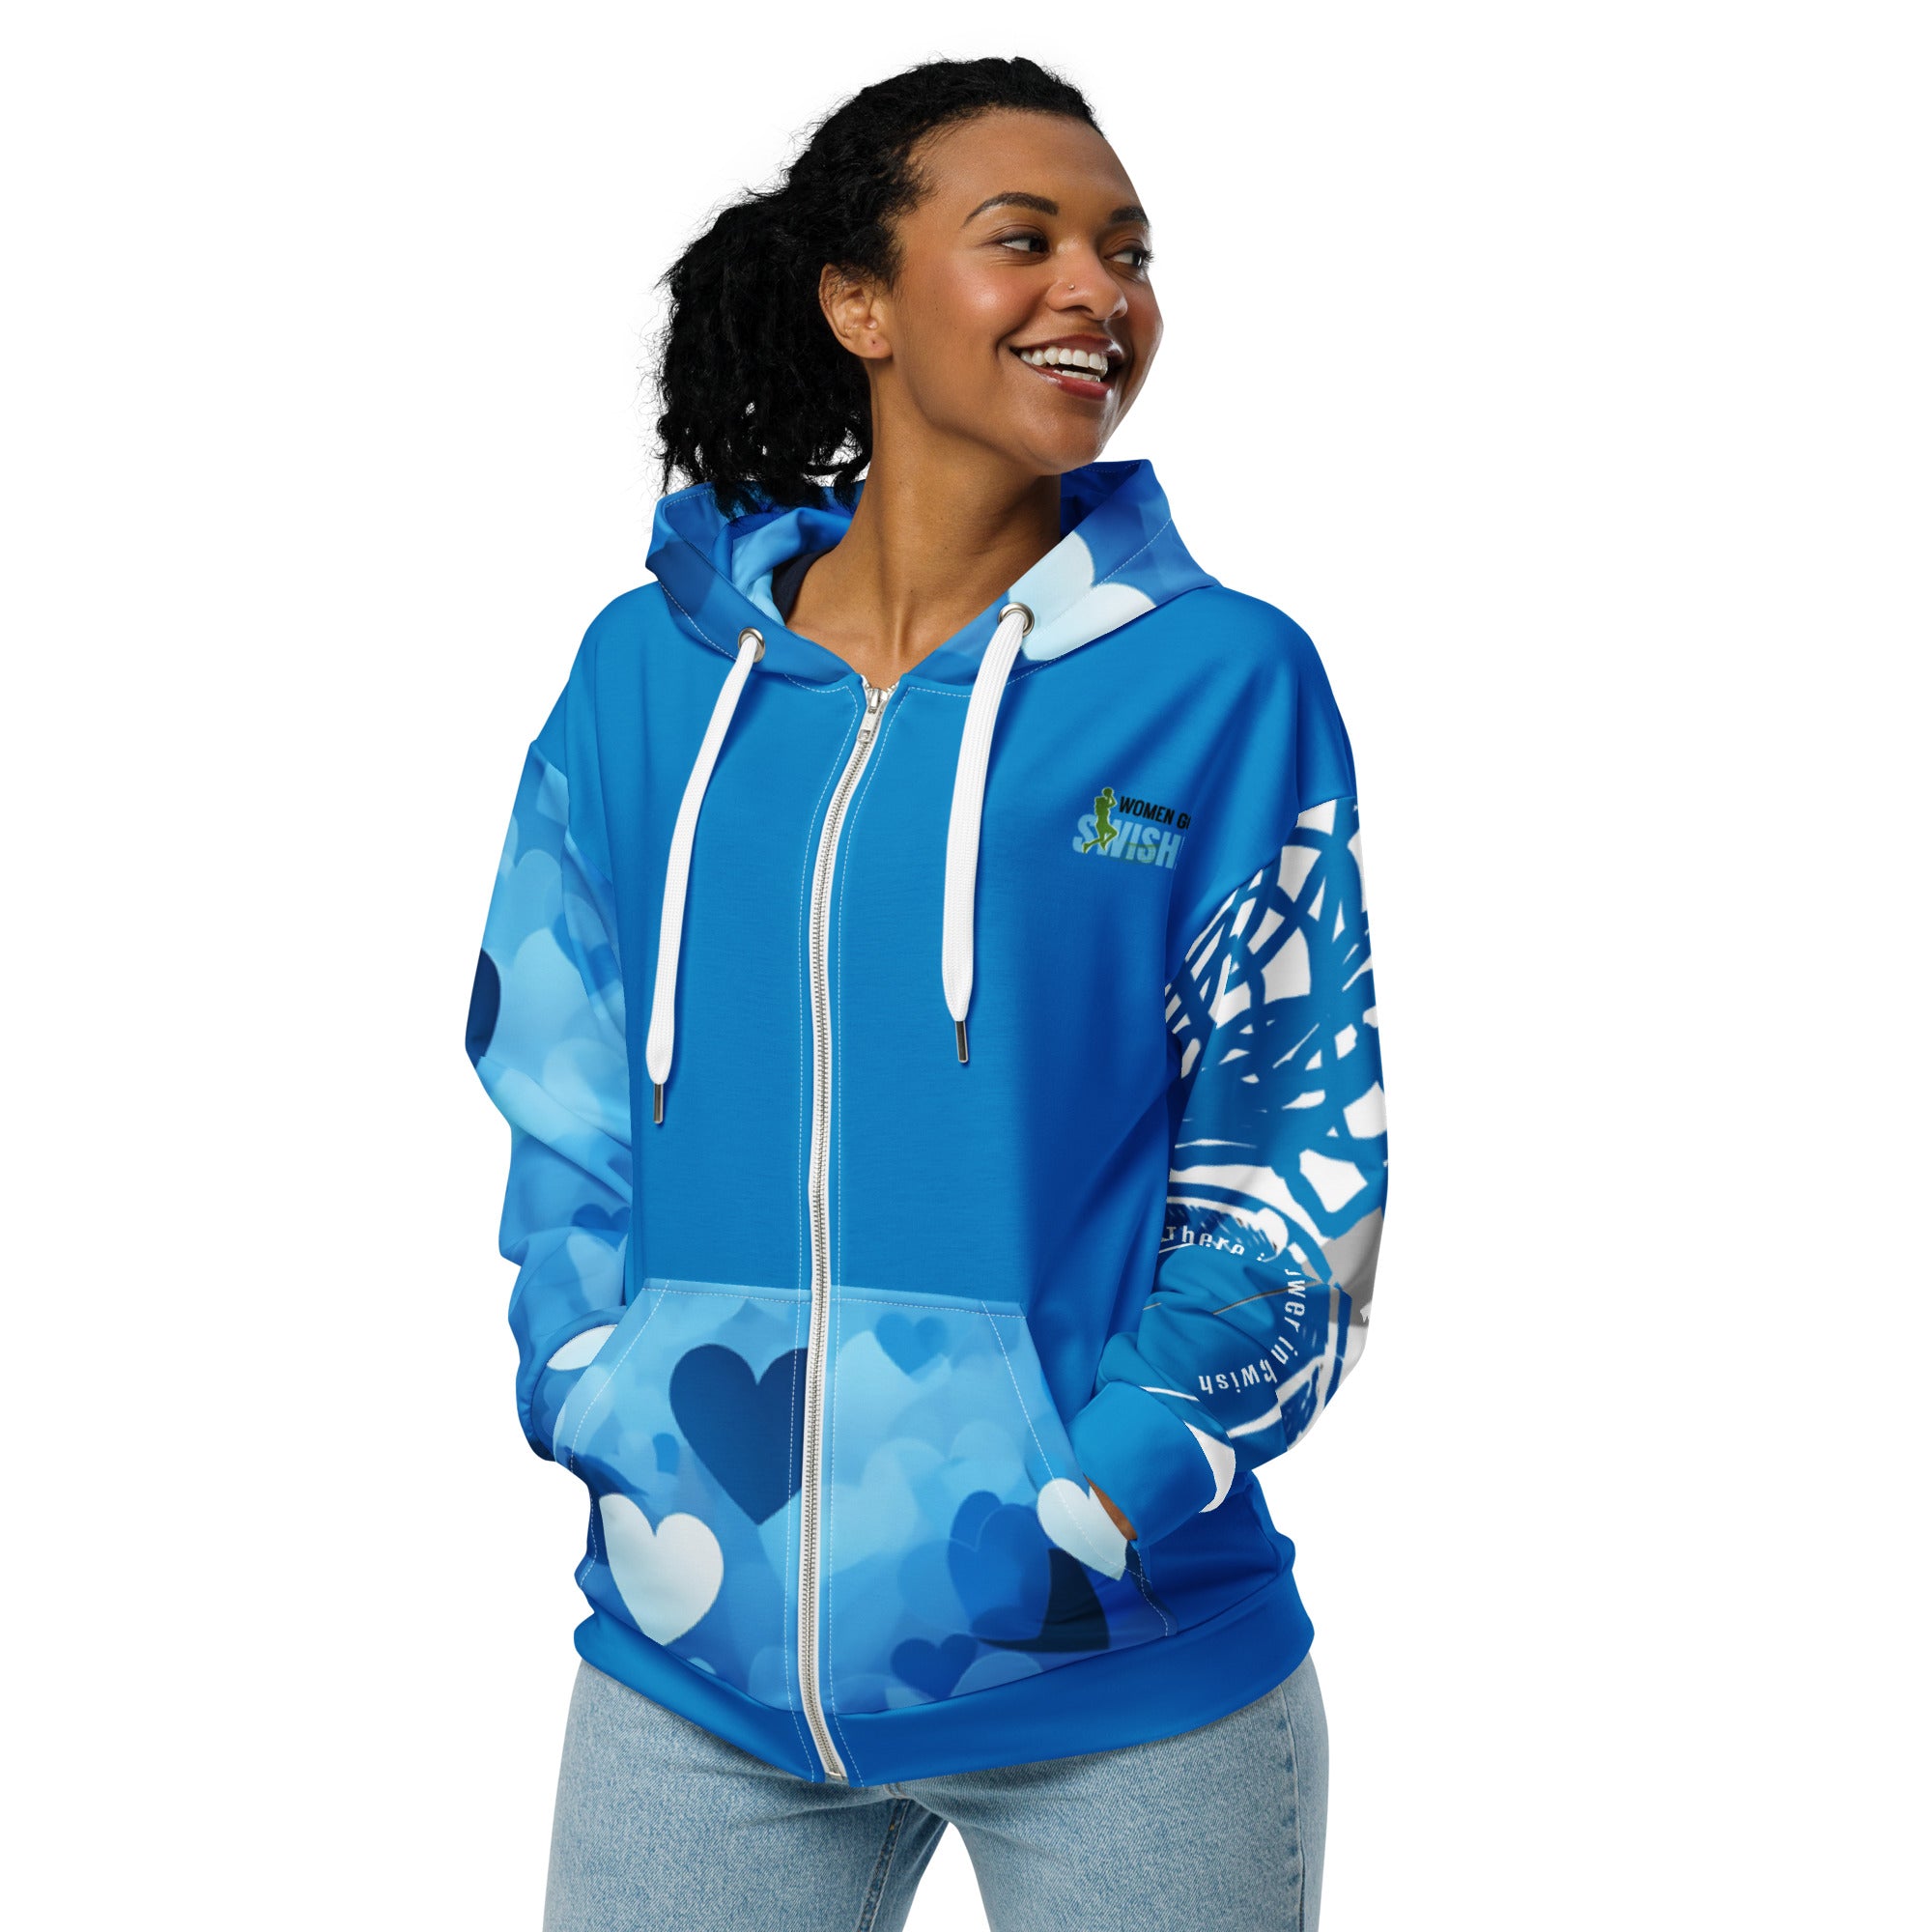 "I Love Women's Sports" Navy Blue Zip Hoodie Introducing the I Love Women's Sports Navy Blue zip hoodie, a must-have for every woman who loves sports. Made from 95% recycled polyester, this hoodie is both stylish and sustainable. With a soft, cotton-like